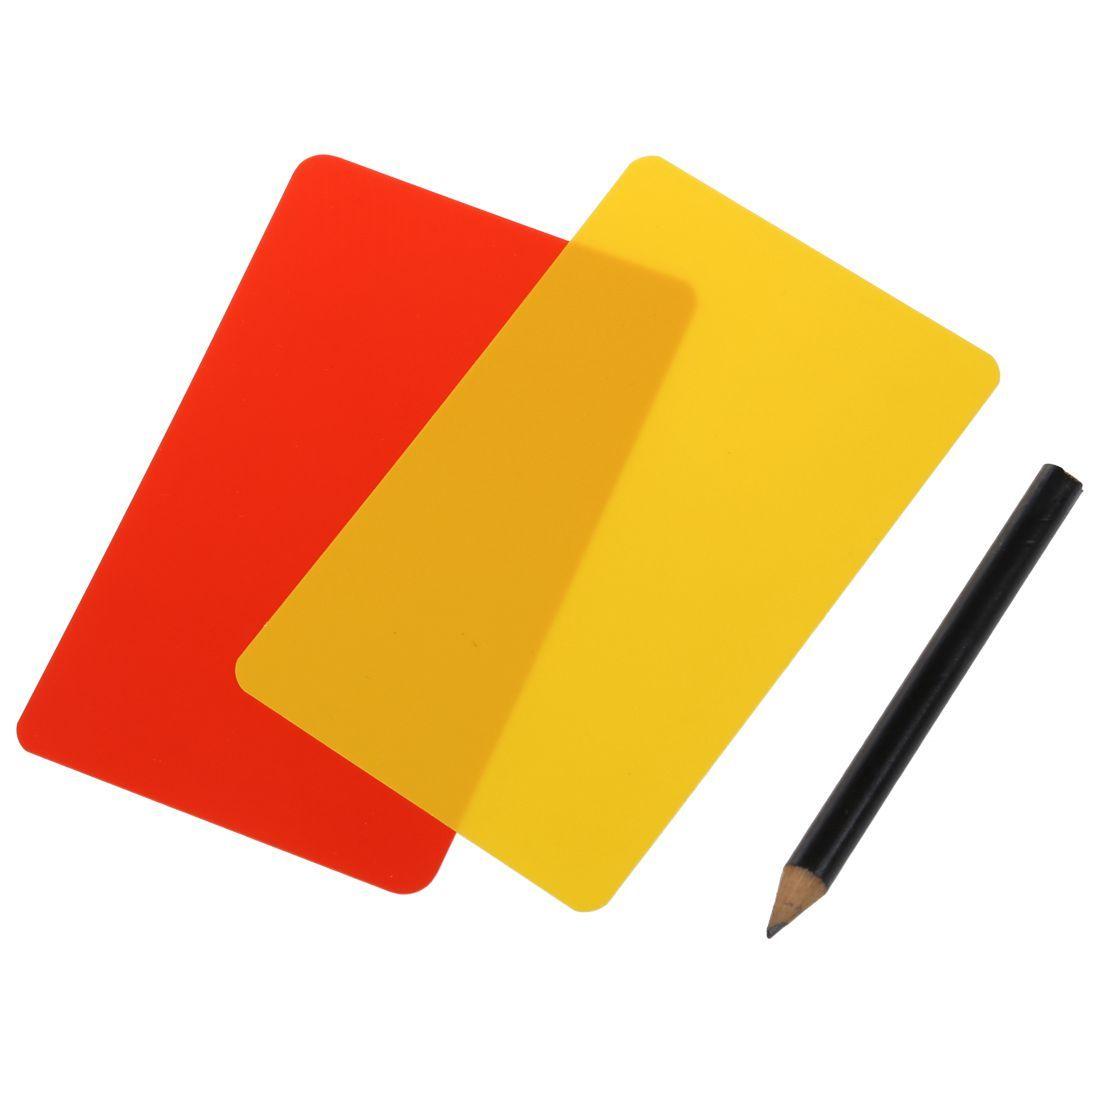 Red and Yellow Match Logo - Box for football match referee red and yellow cards R3F4 ...